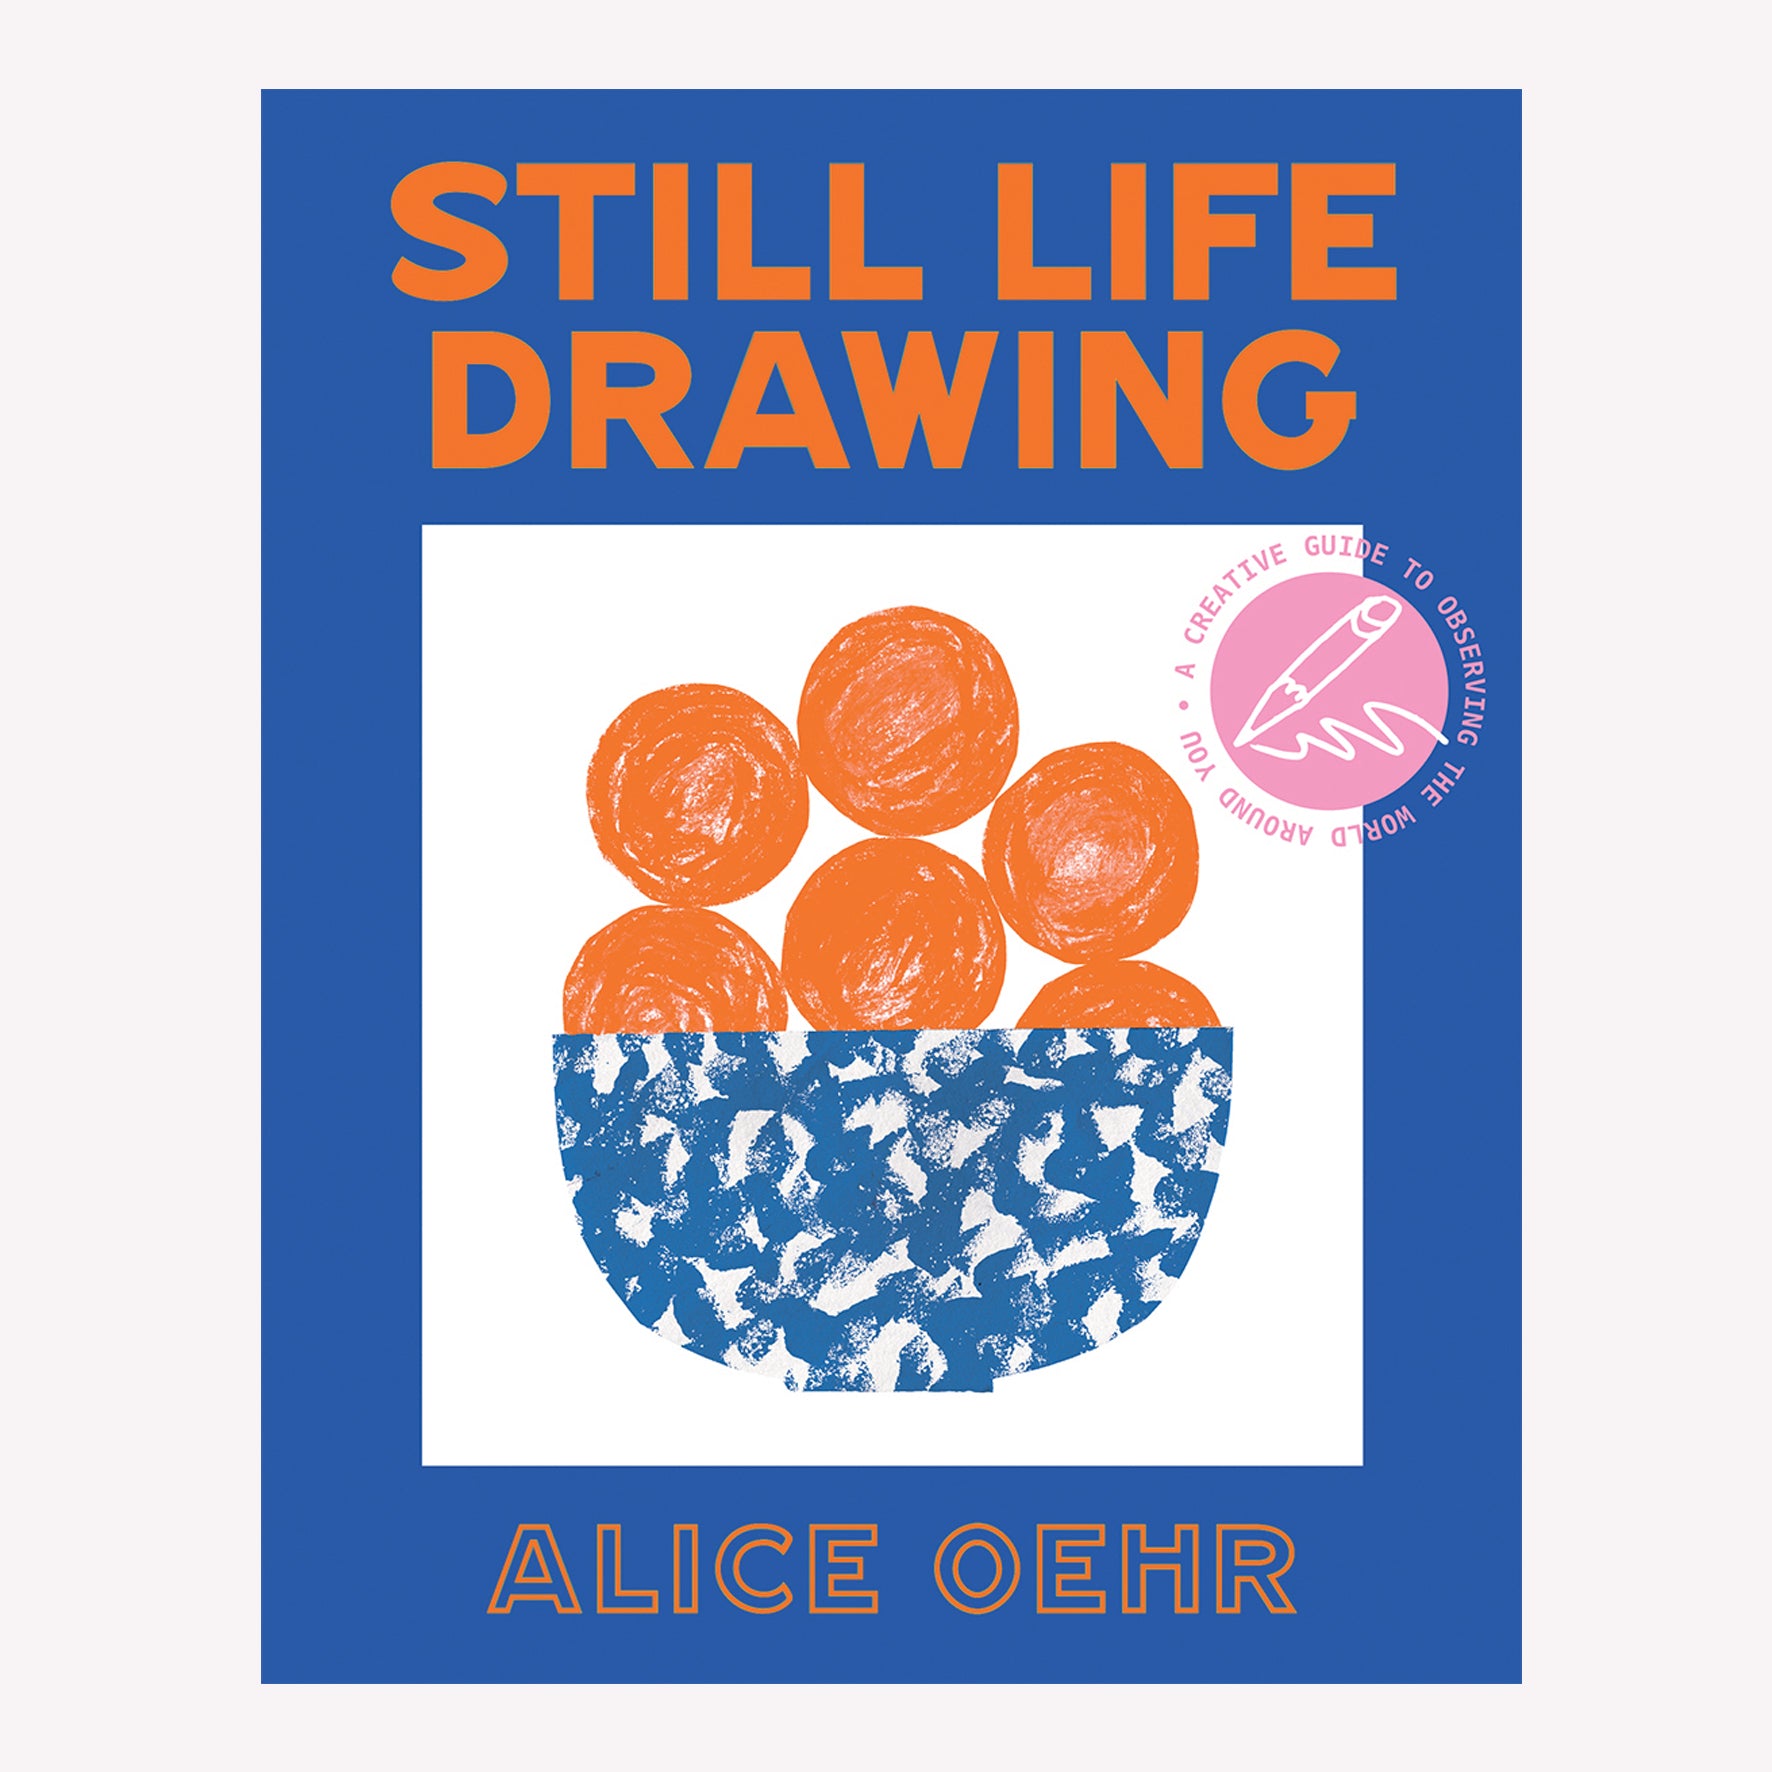 Book Cover titled “Still Life Drawing” by Alice Oehr. Cover image features playful illustration of oranges in a fruit bowl with a limited blue and orange palette.  